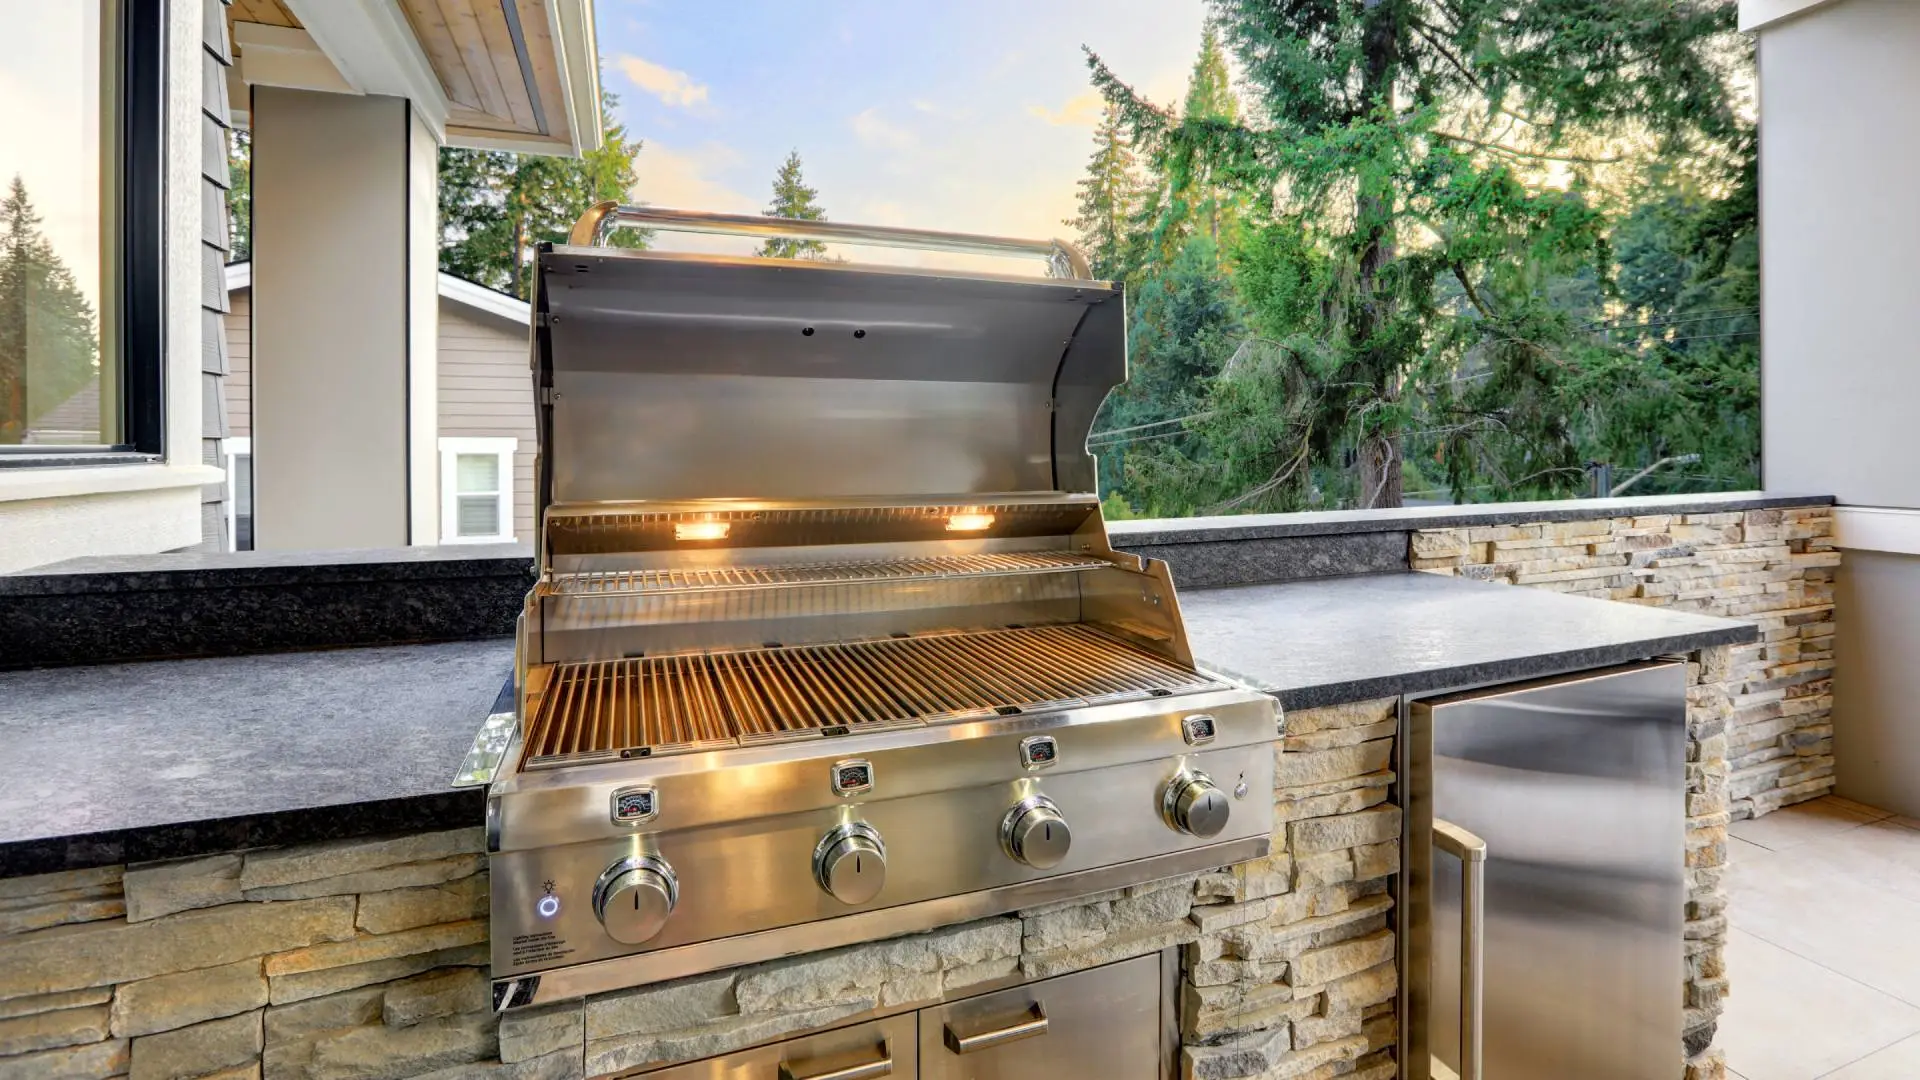 Stainless less grill installed with outdoor kitchen in Waukee, IA.